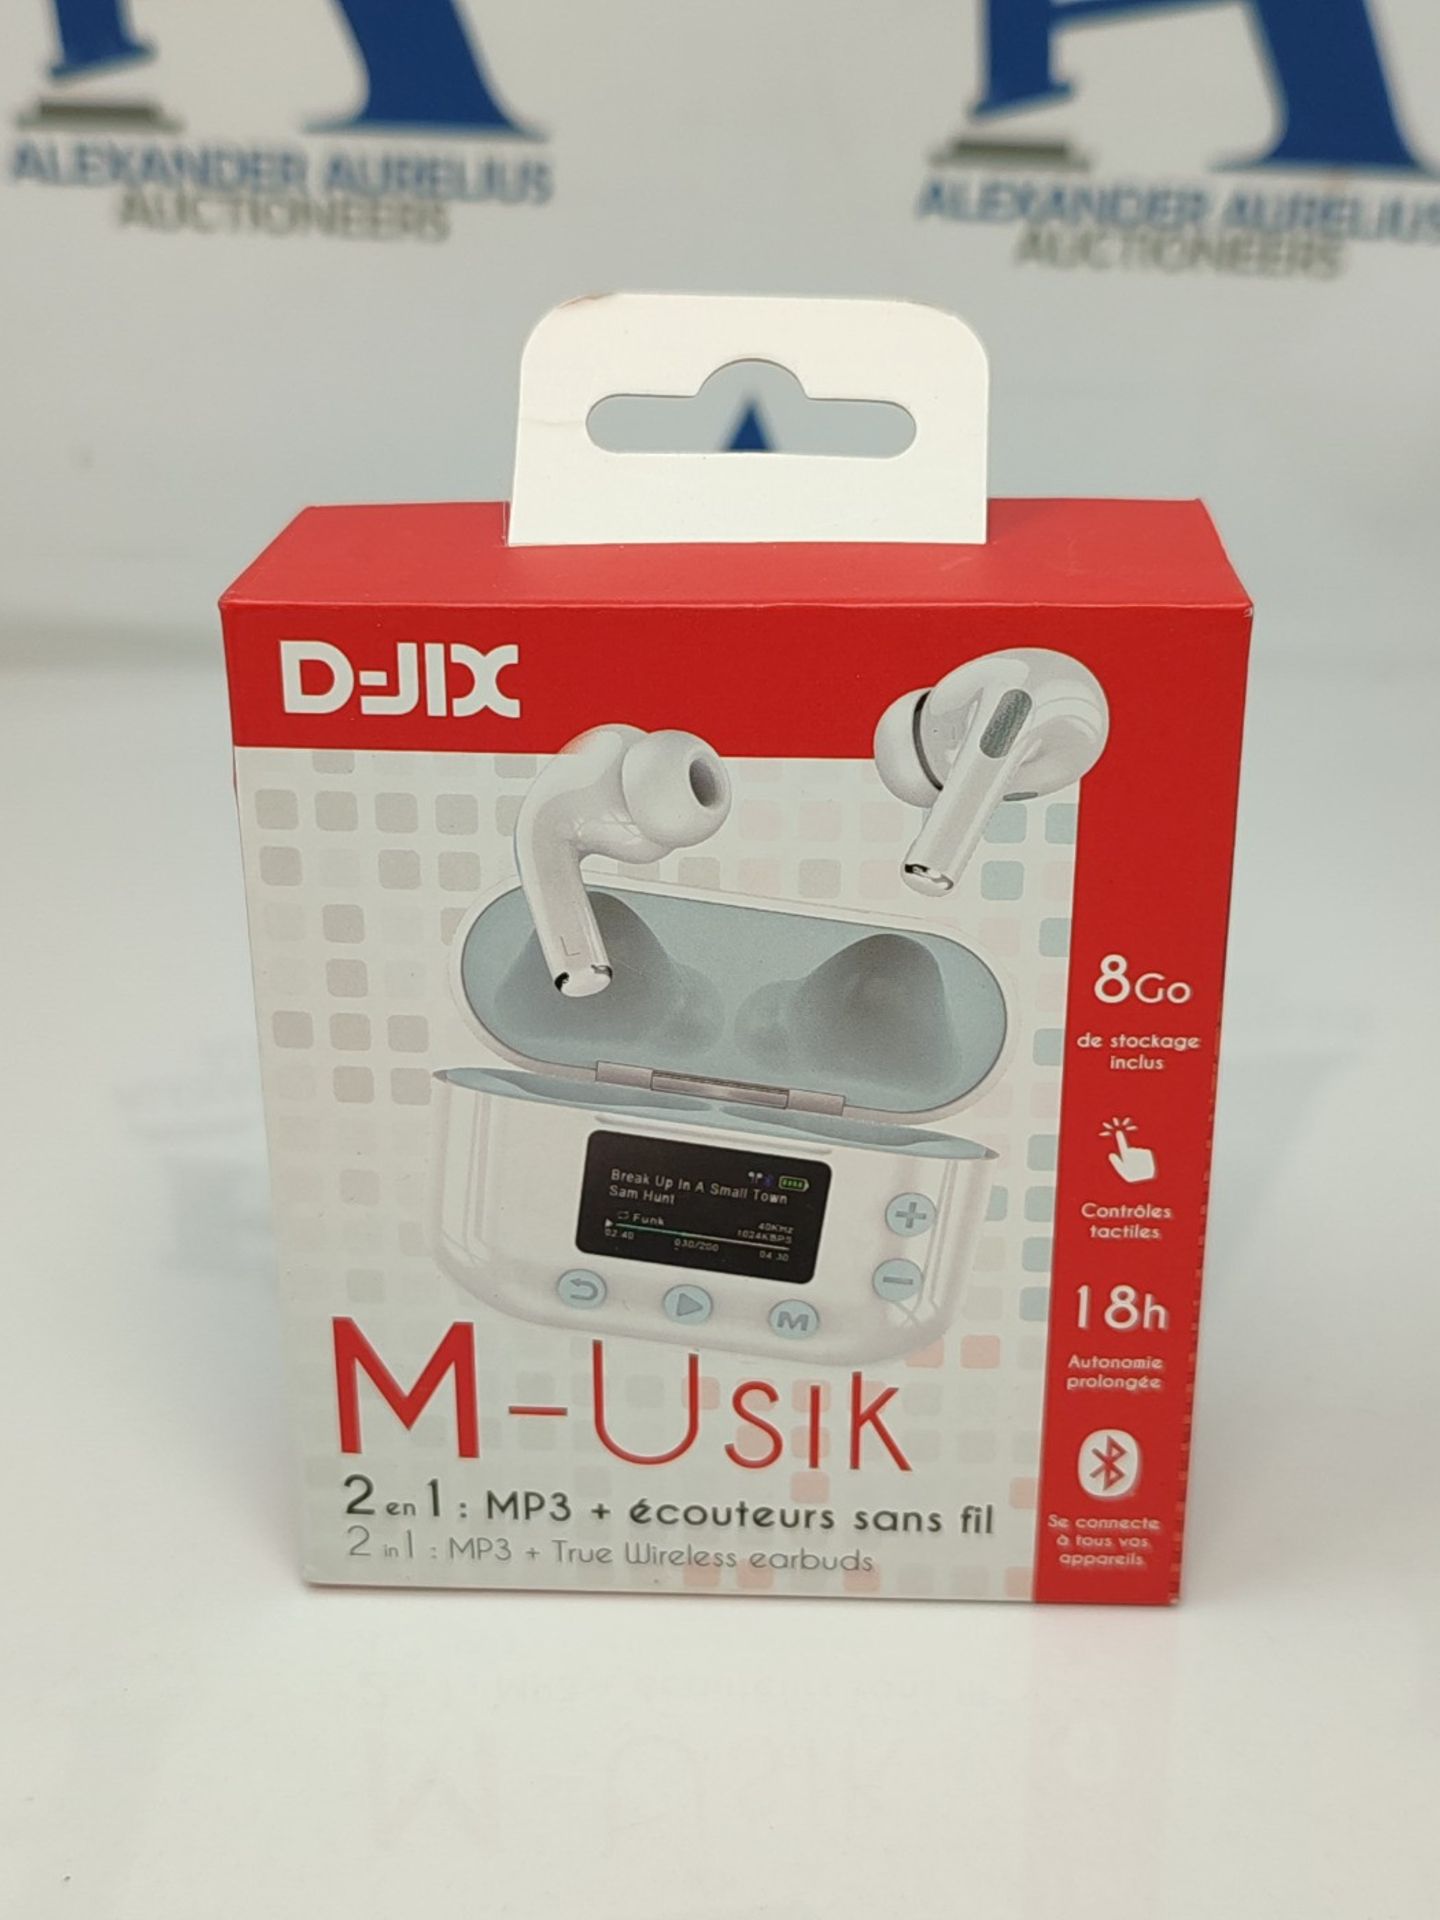 D-Jix - Wireless Bluetooth Earphones M-Usik Player - 2 in 1 Device Wireless Bluetooth - Image 5 of 6